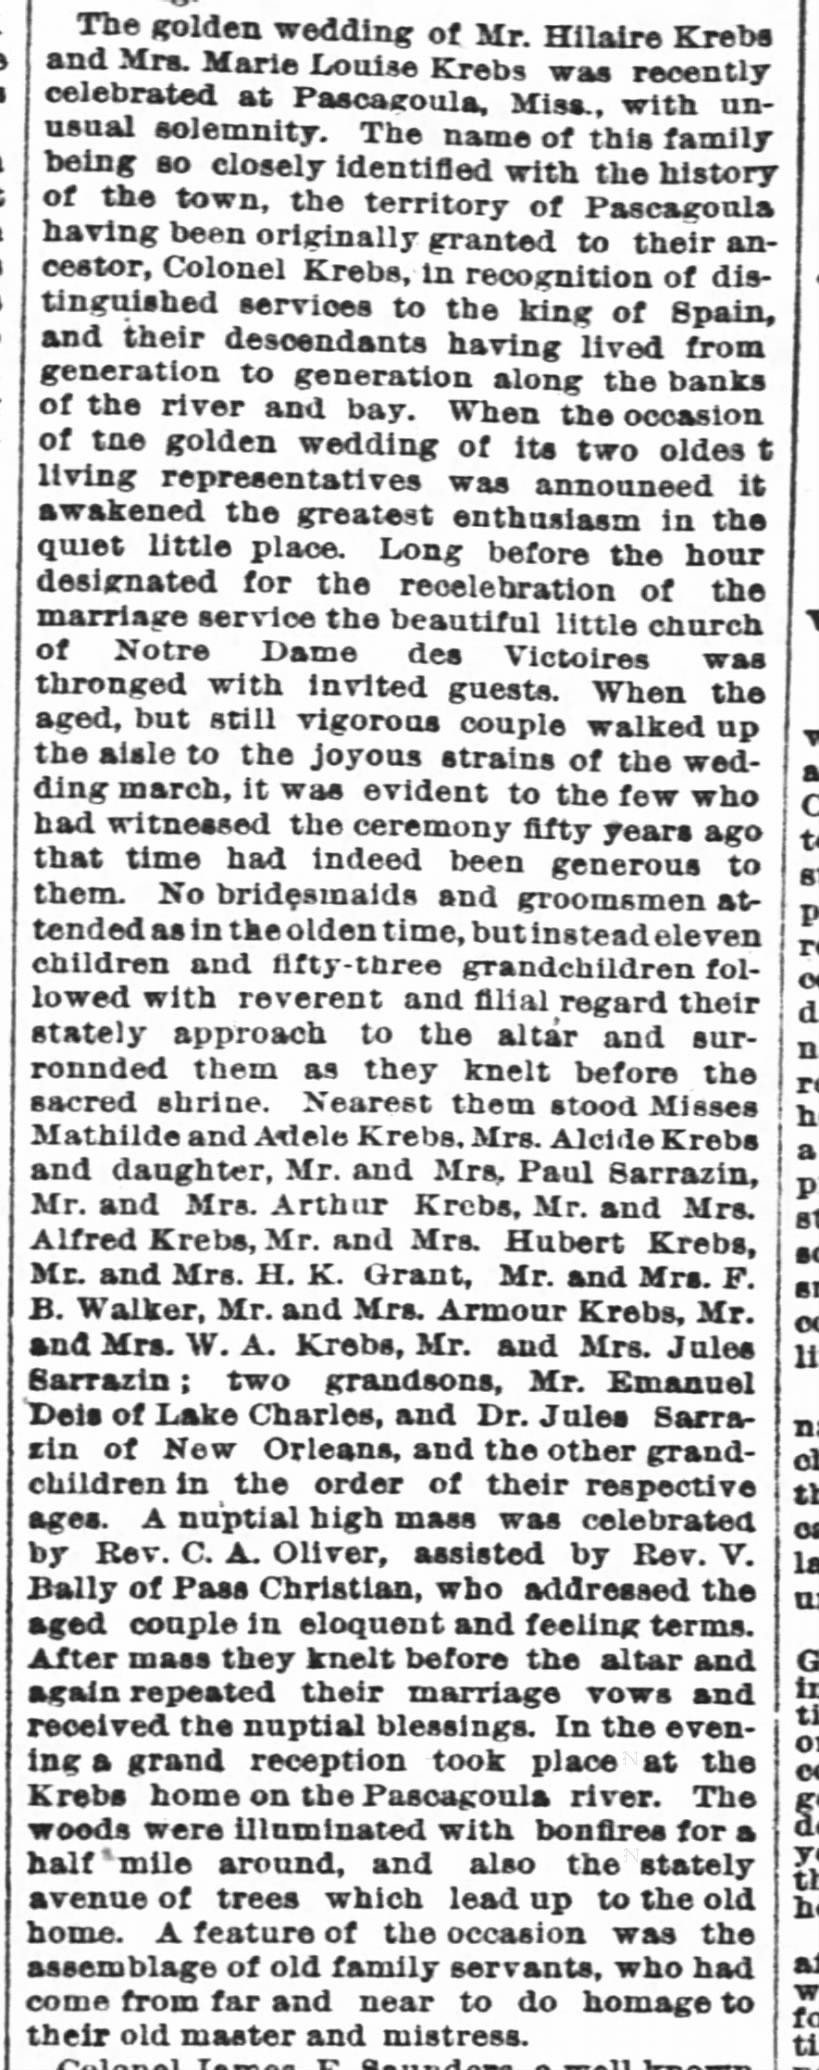 Golden Wedding (50 Year Vow renewal) of Hilaire and Marie Louise Krebs, 1890.